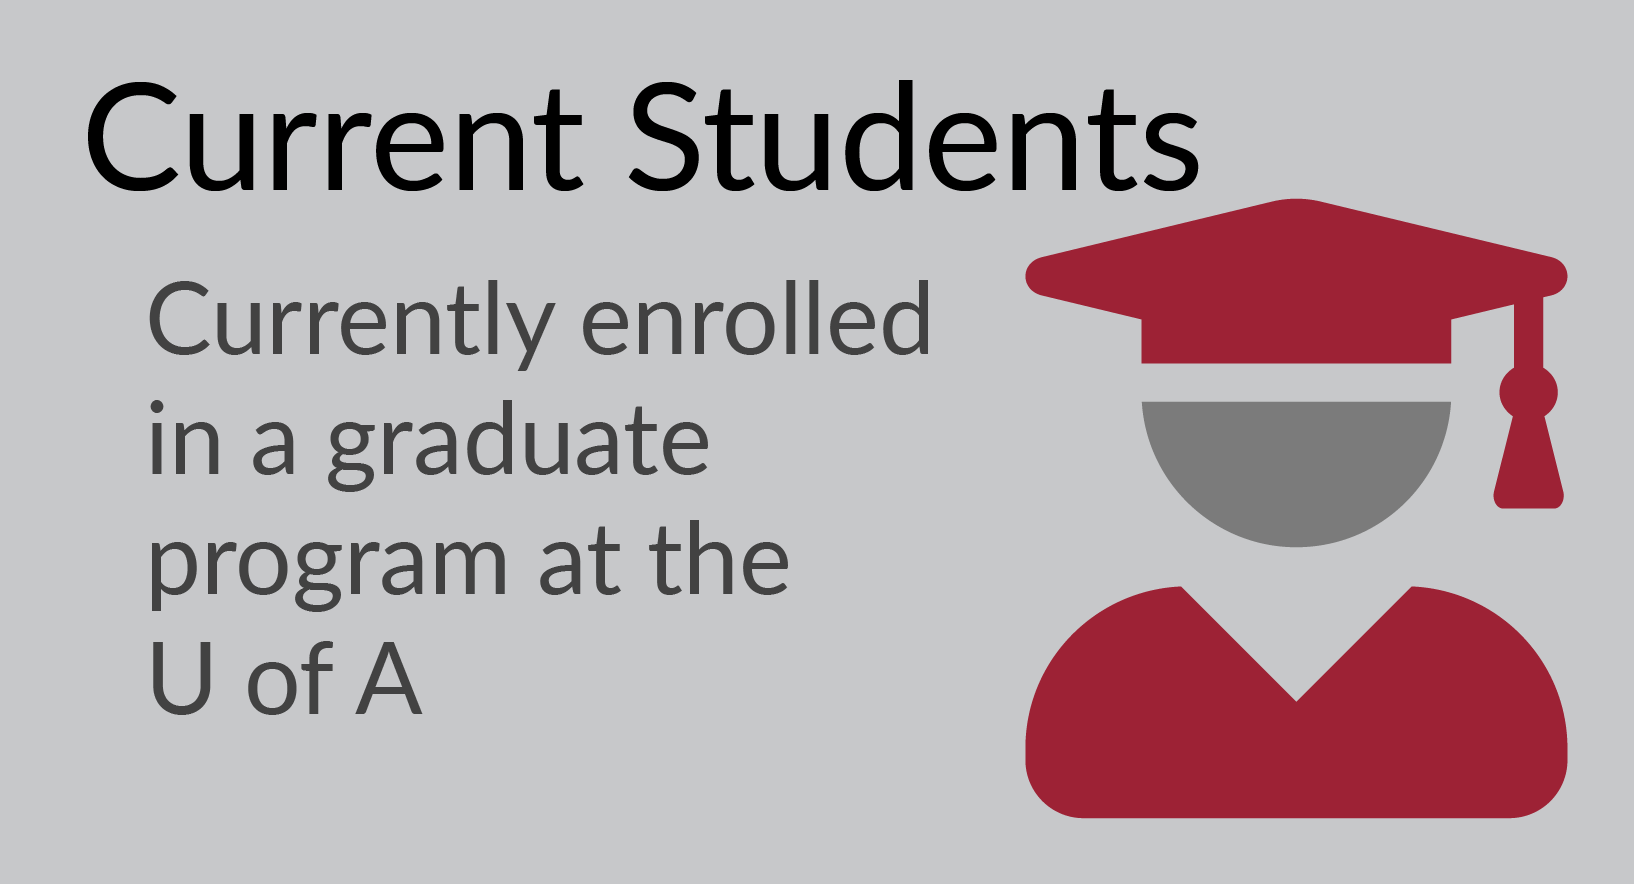 Current Students: Students currently enrolled in a graduate program at the U of A